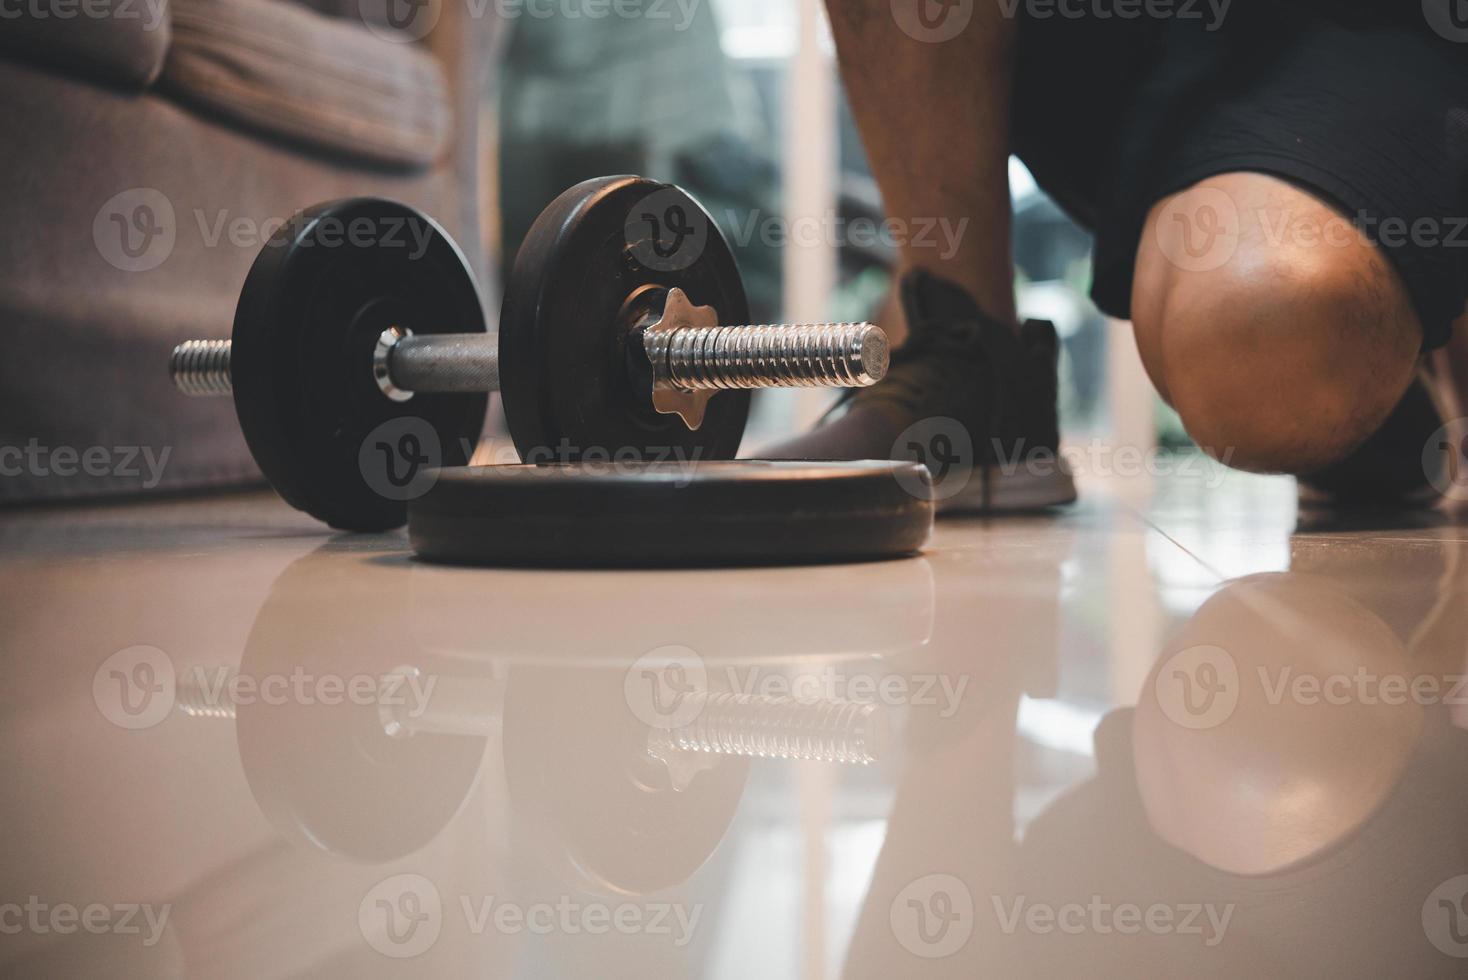 Fitness motivation and muscle training concept. Home workout routine fitness, Concepts of exercise and muscle training healthy.Dumbbell on the floor. photo